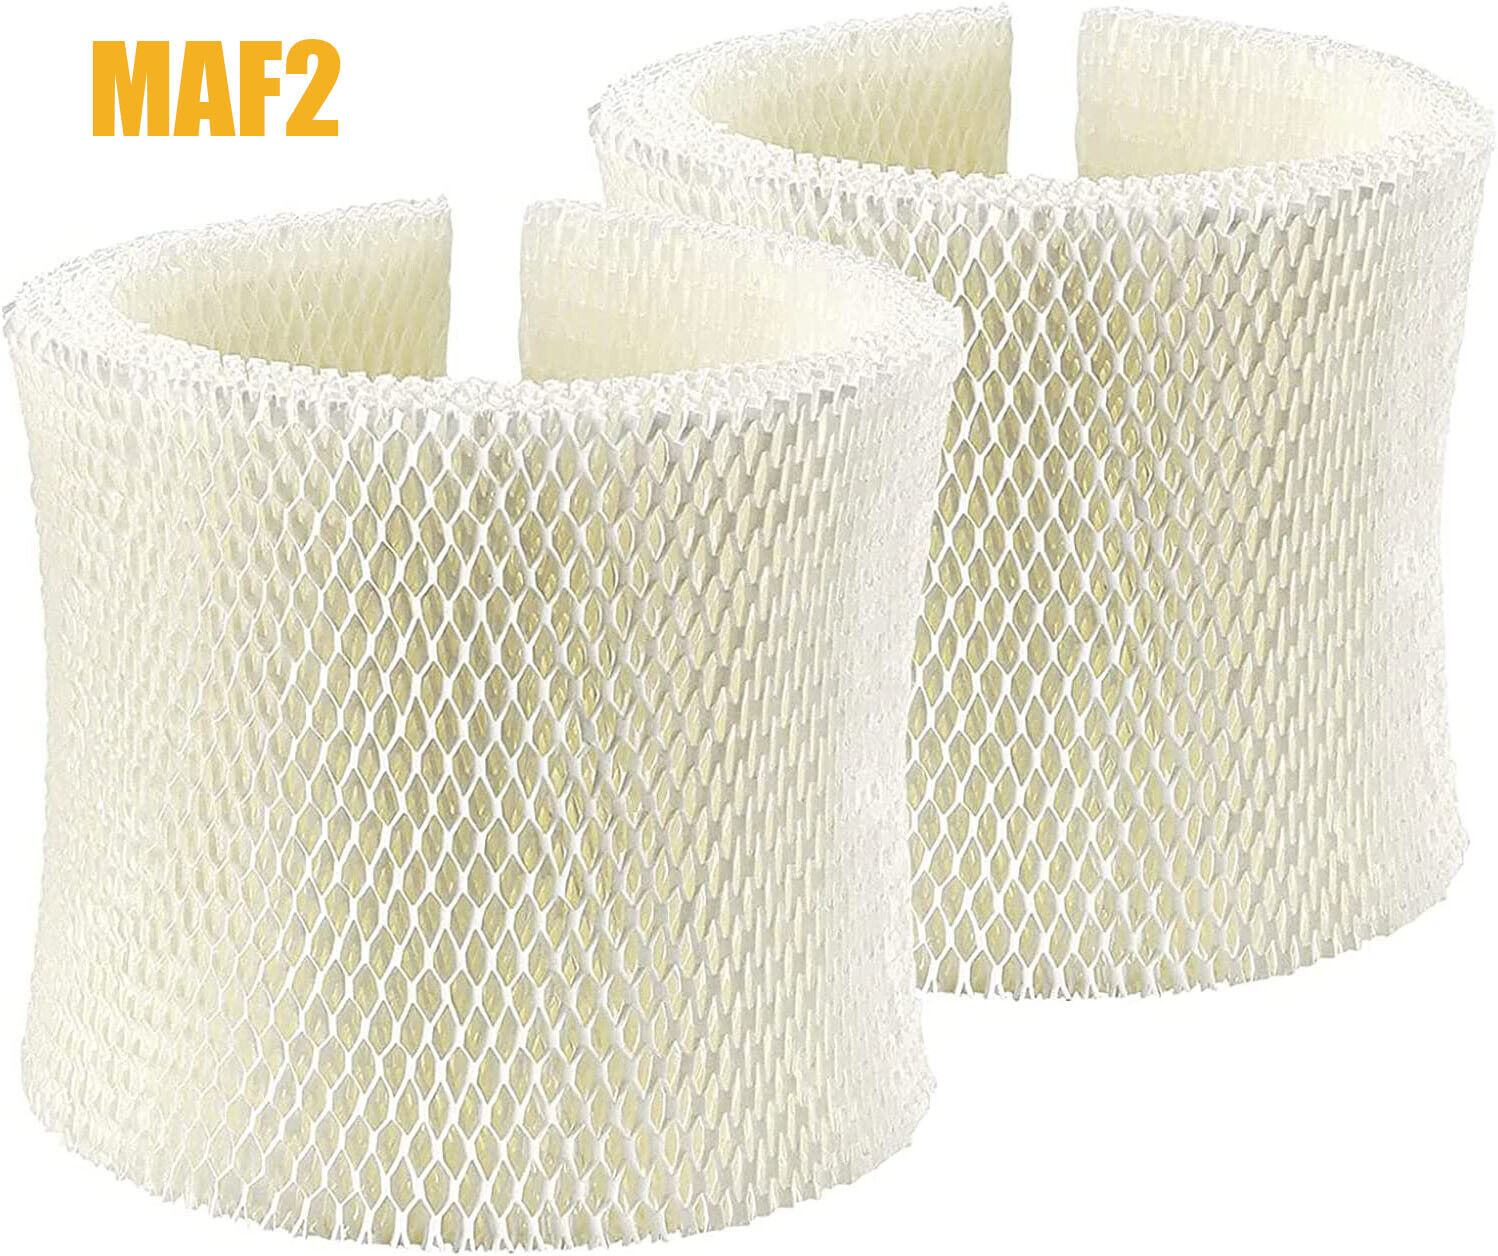 Humidifier Filter Wick for Essick Air MAF2 2PACK